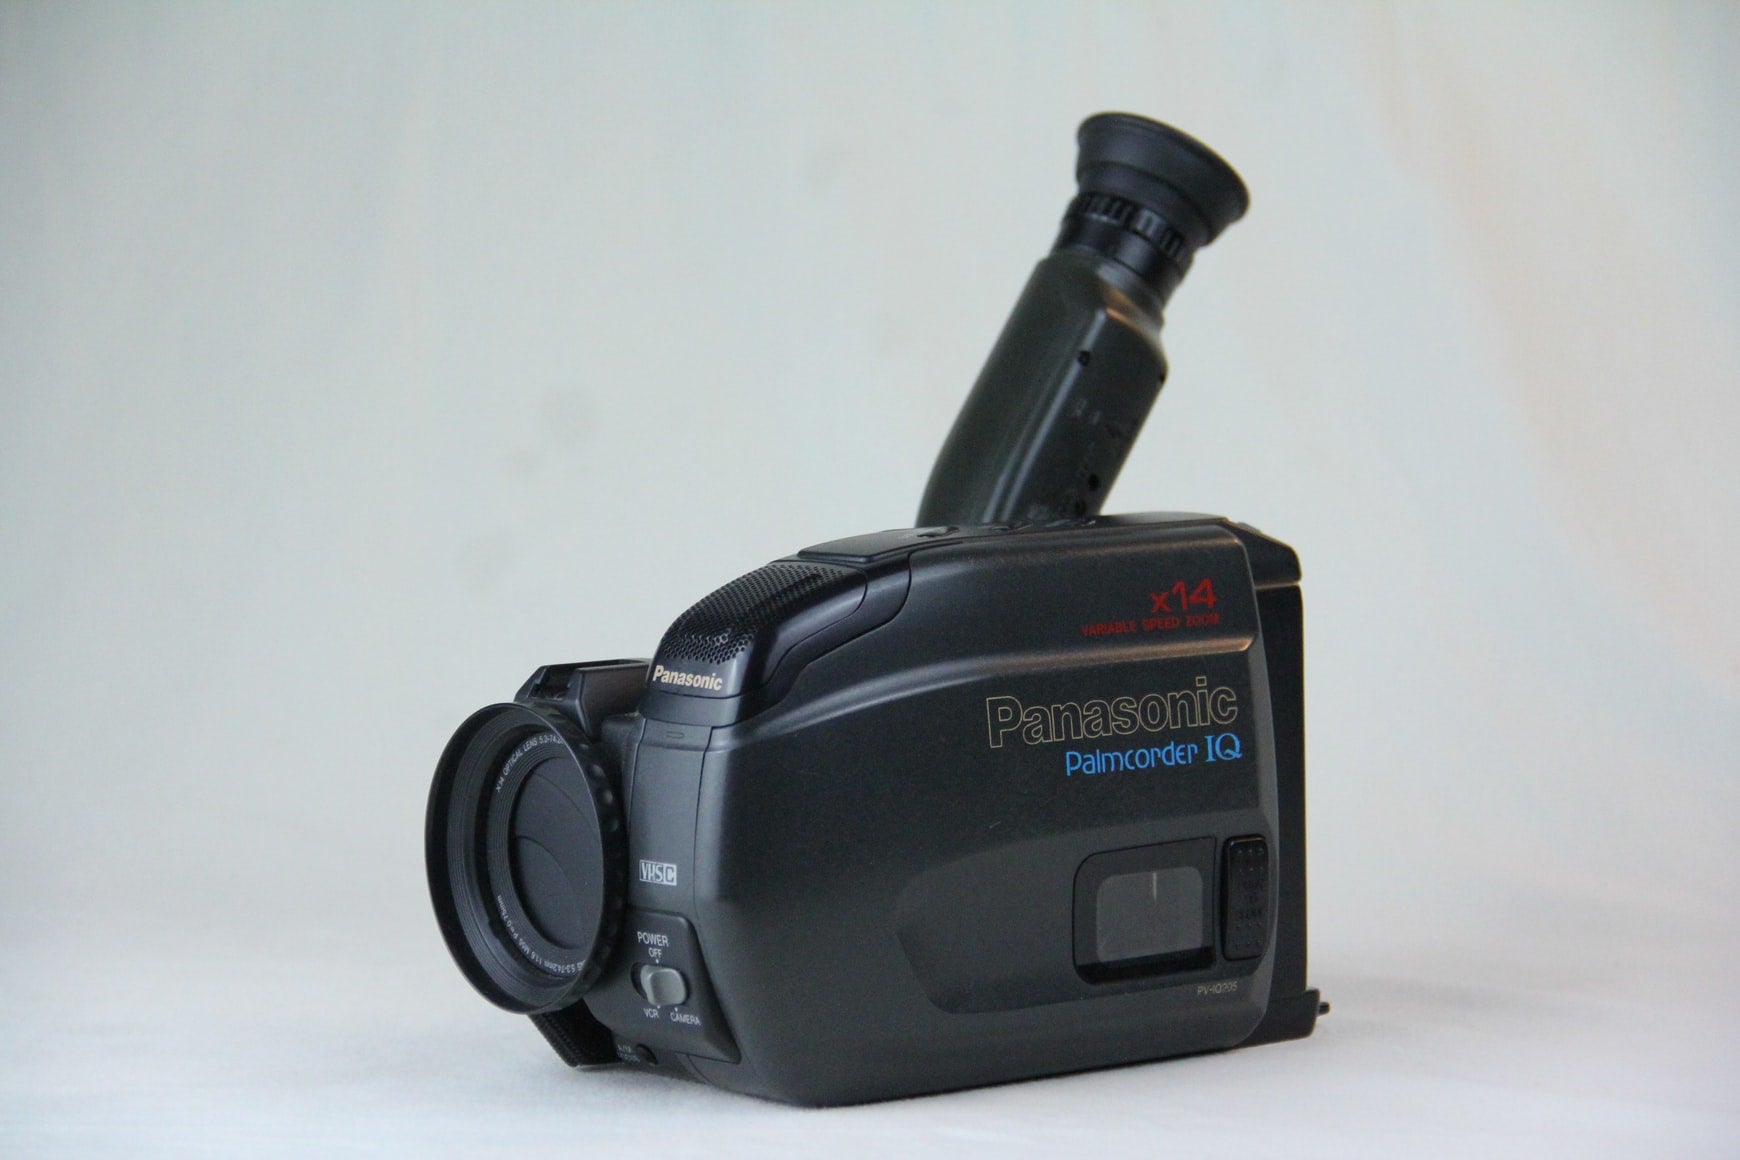 What Is the Difference Between a Video Camera and a Camcorder?